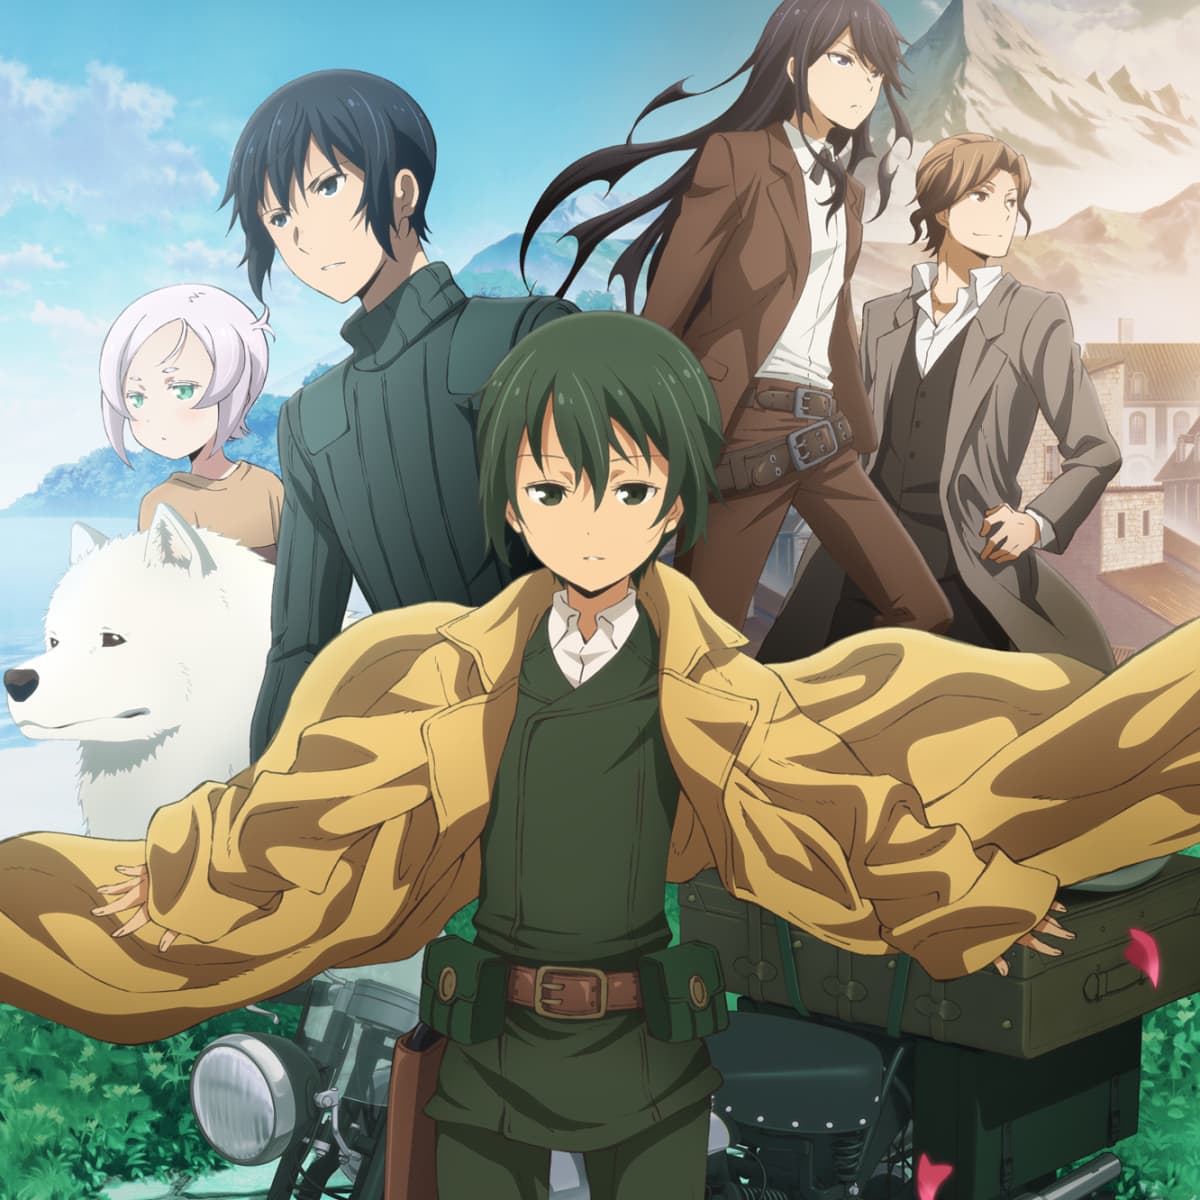 Kino's Journey is together with the Monogatari Series by far my